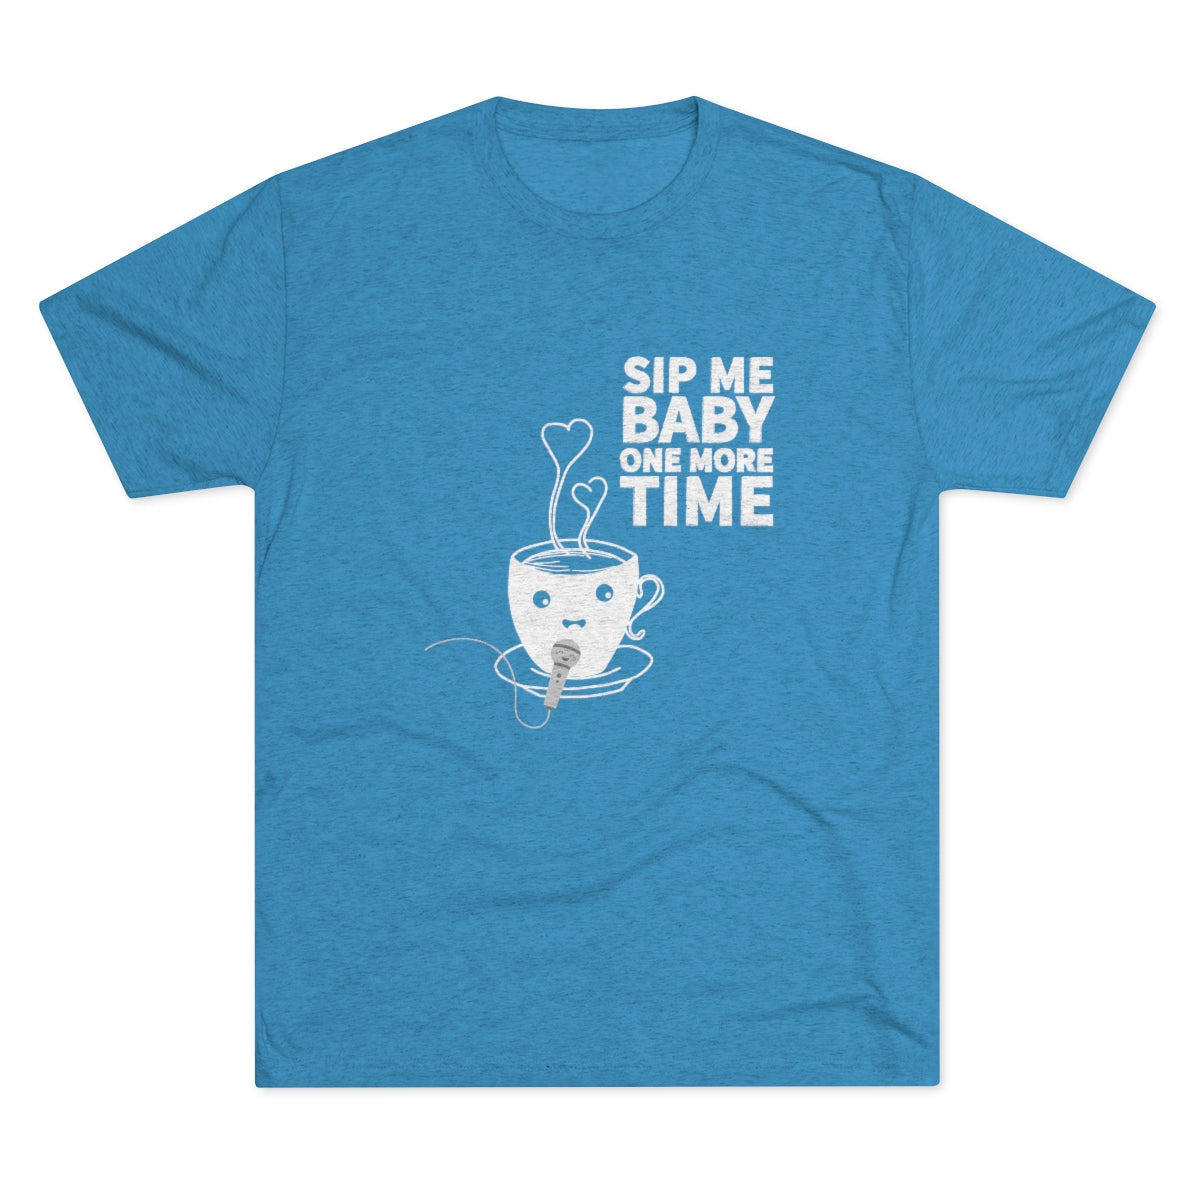 Sip Me Baby Graphic Tee - Tri-Blend Vintage Turquoise S - Harney & Sons Fine Teas